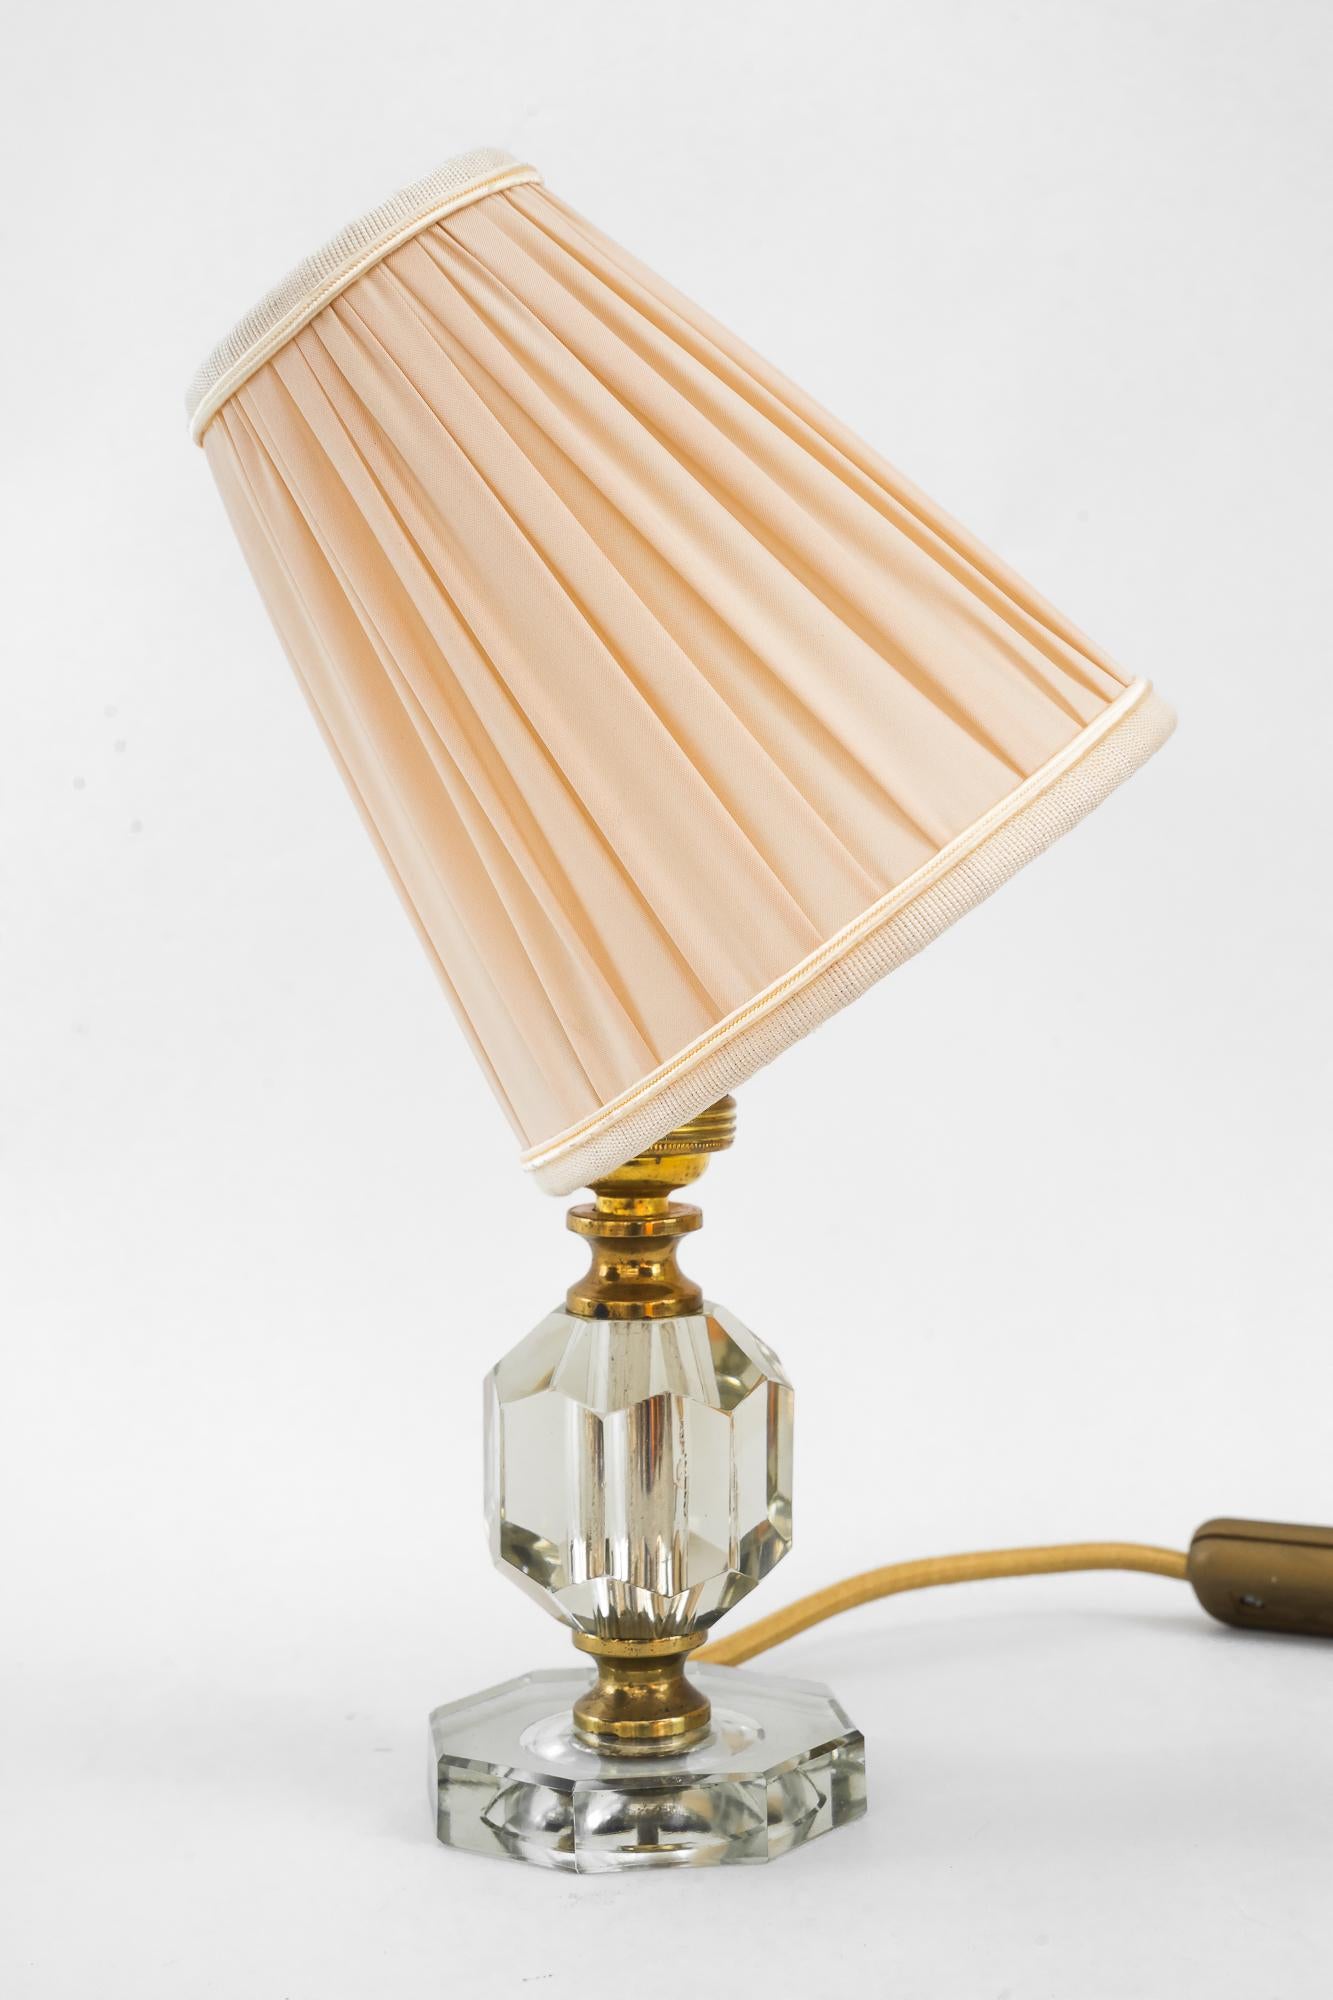 Small bakalowits table lamp vienna around 1950s
Cut glass and brass
The fabric is reolaced ( new ).